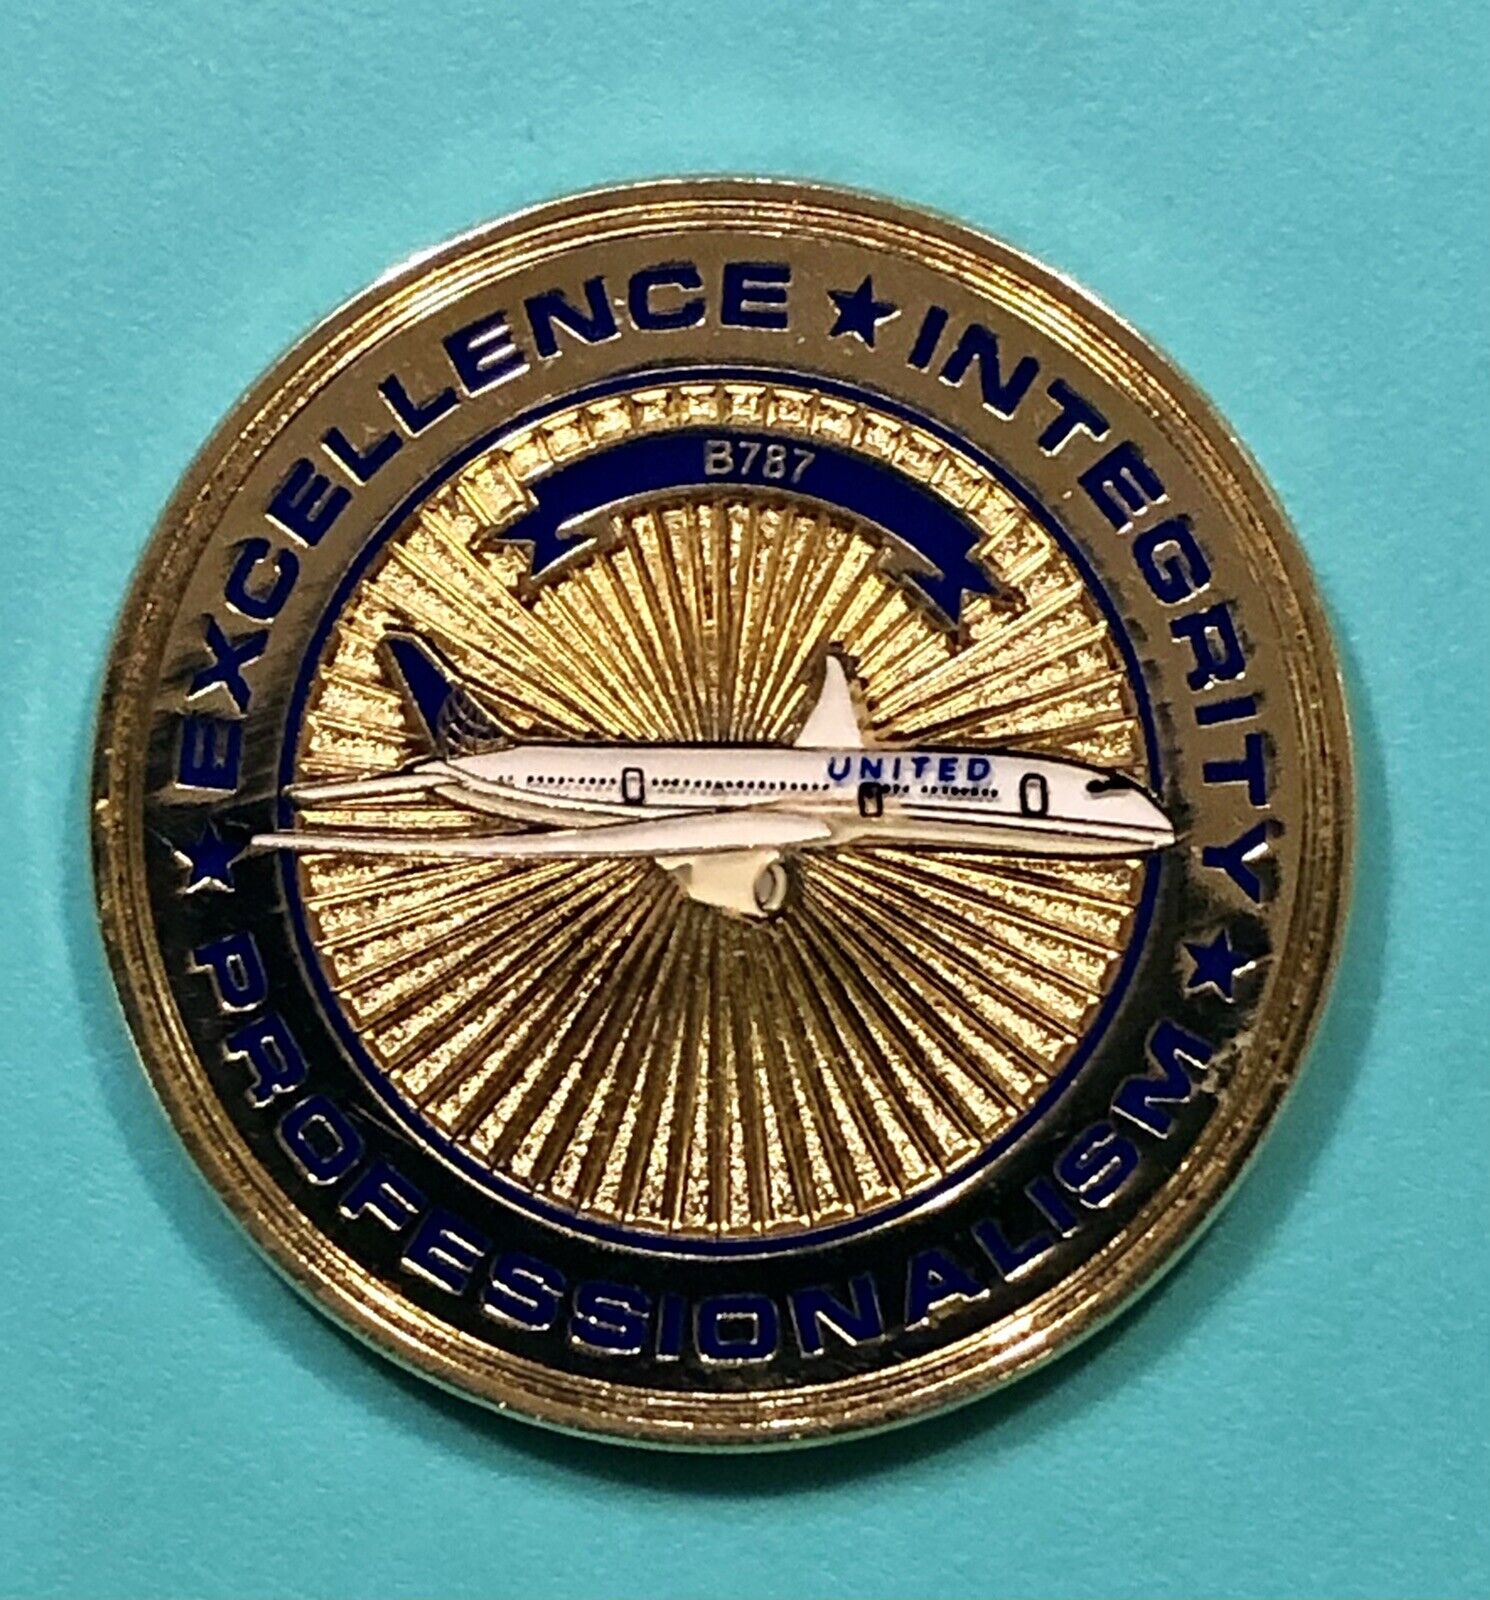 UNITED AIRLINES CHALLENGE COIN— 787 DREAMLINER